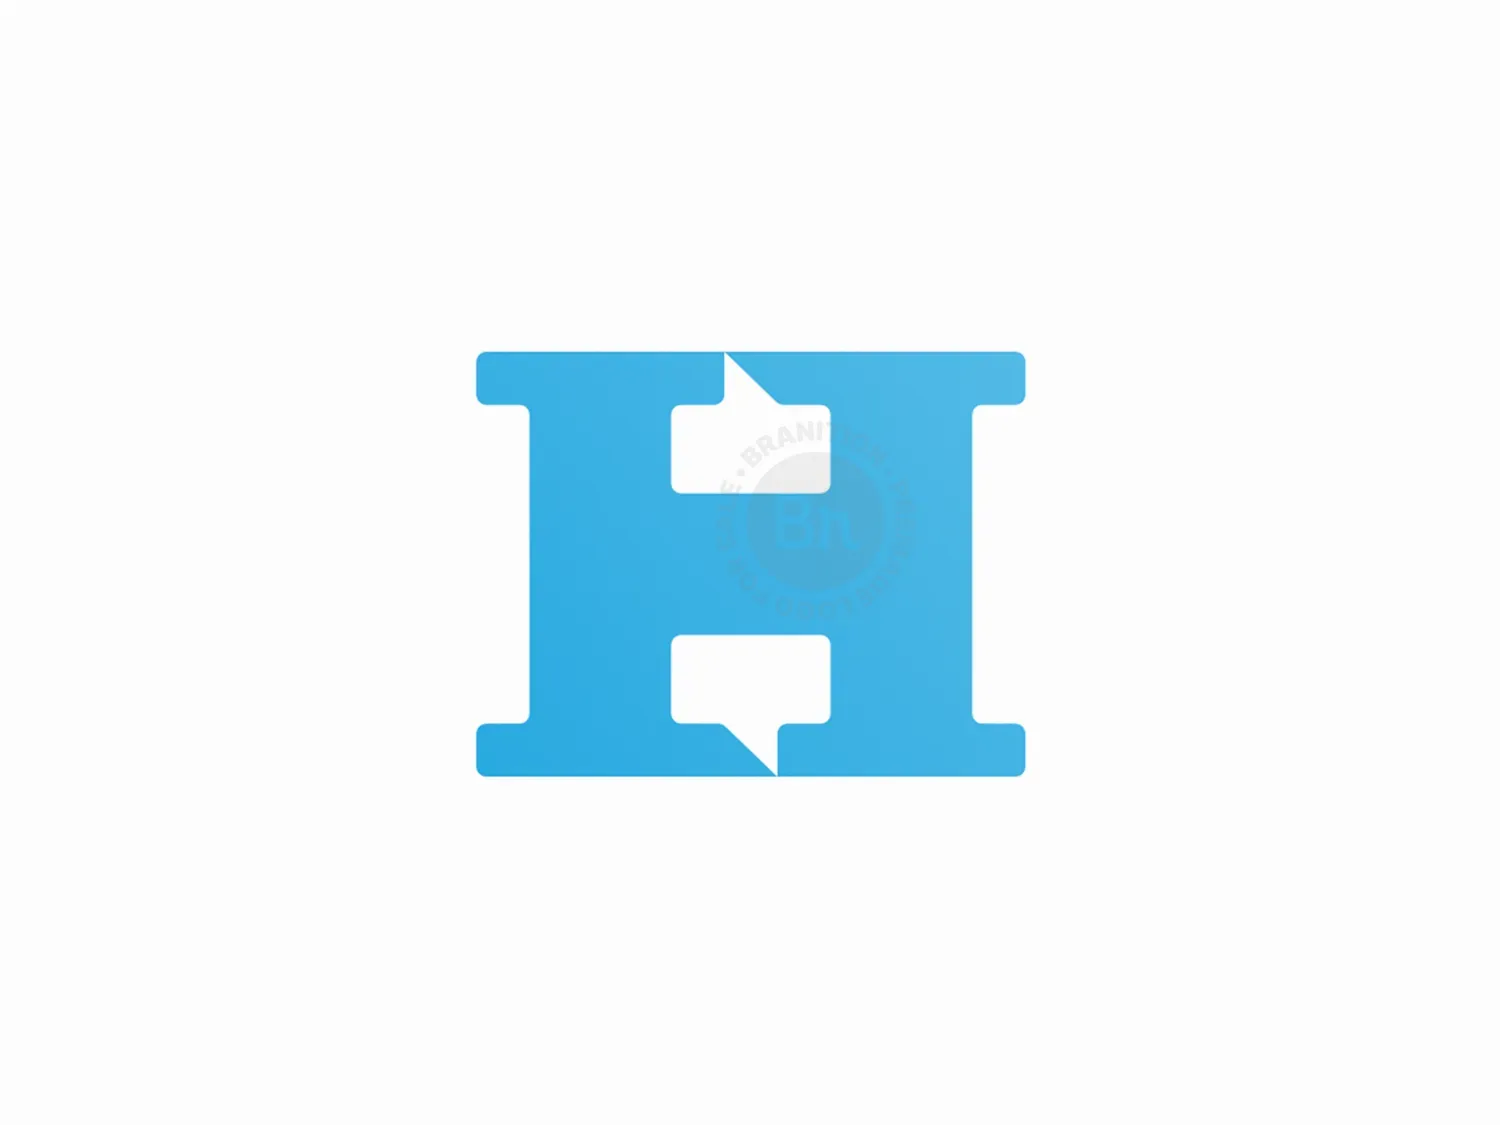 H Chat Boxes, Letter Mark Negative Space Logo Symbol Icon